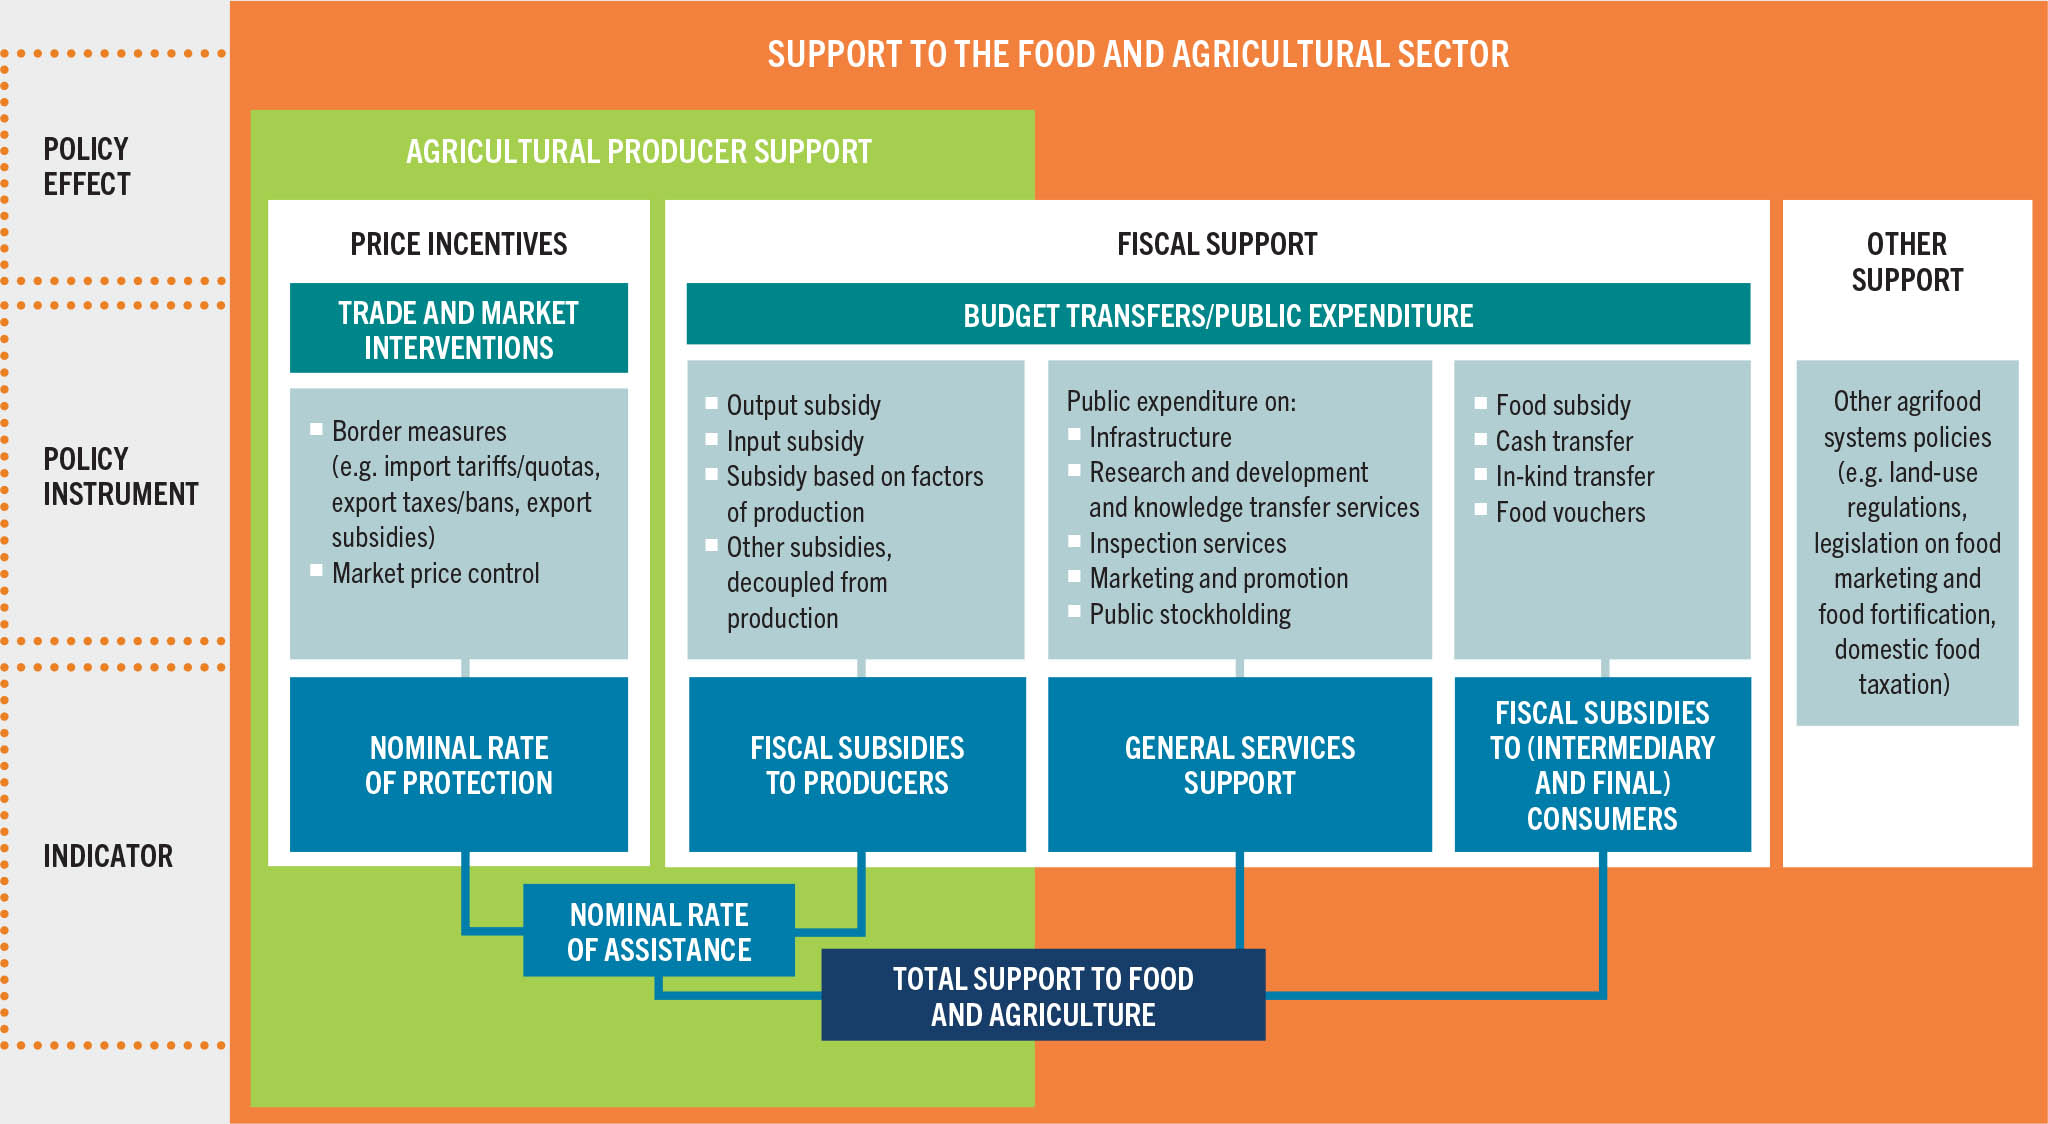 SOURCE: Adapted from FAO, UNDP & UNEP. 2021. A multi-billion-dollar opportunity – Repurposing agricultural support to transform food systems. Rome, FAO.